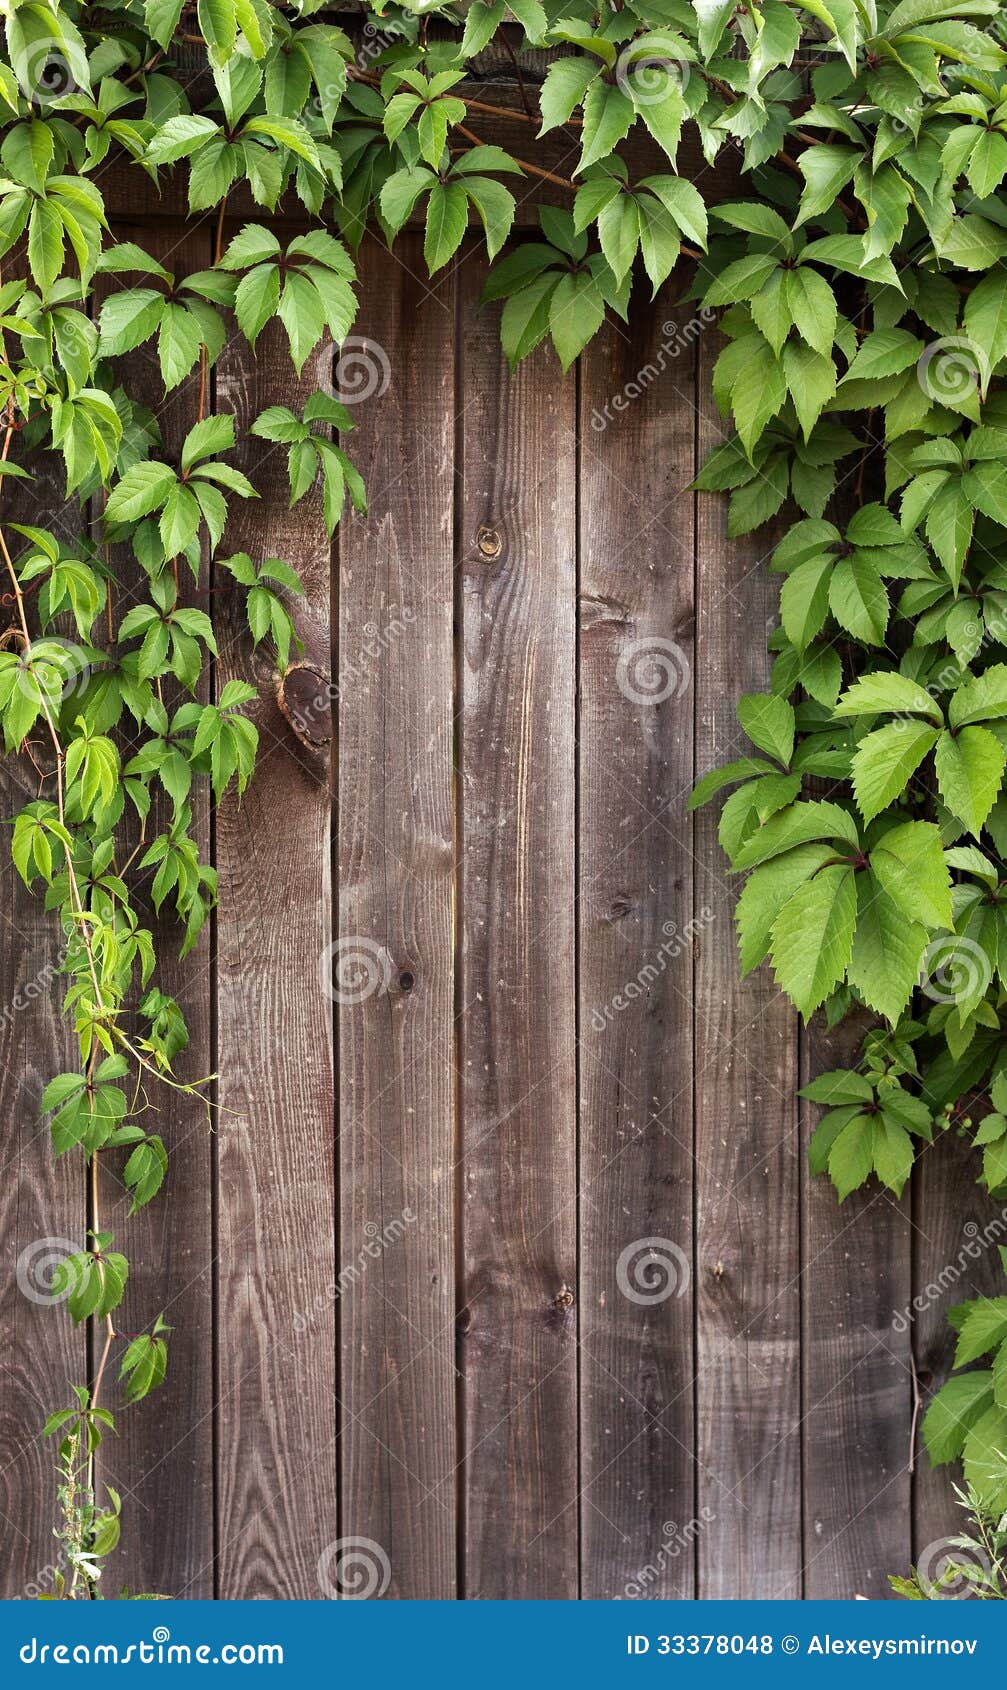 Ivy Frame On Wooden Fance Royalty Free Stock Photos 